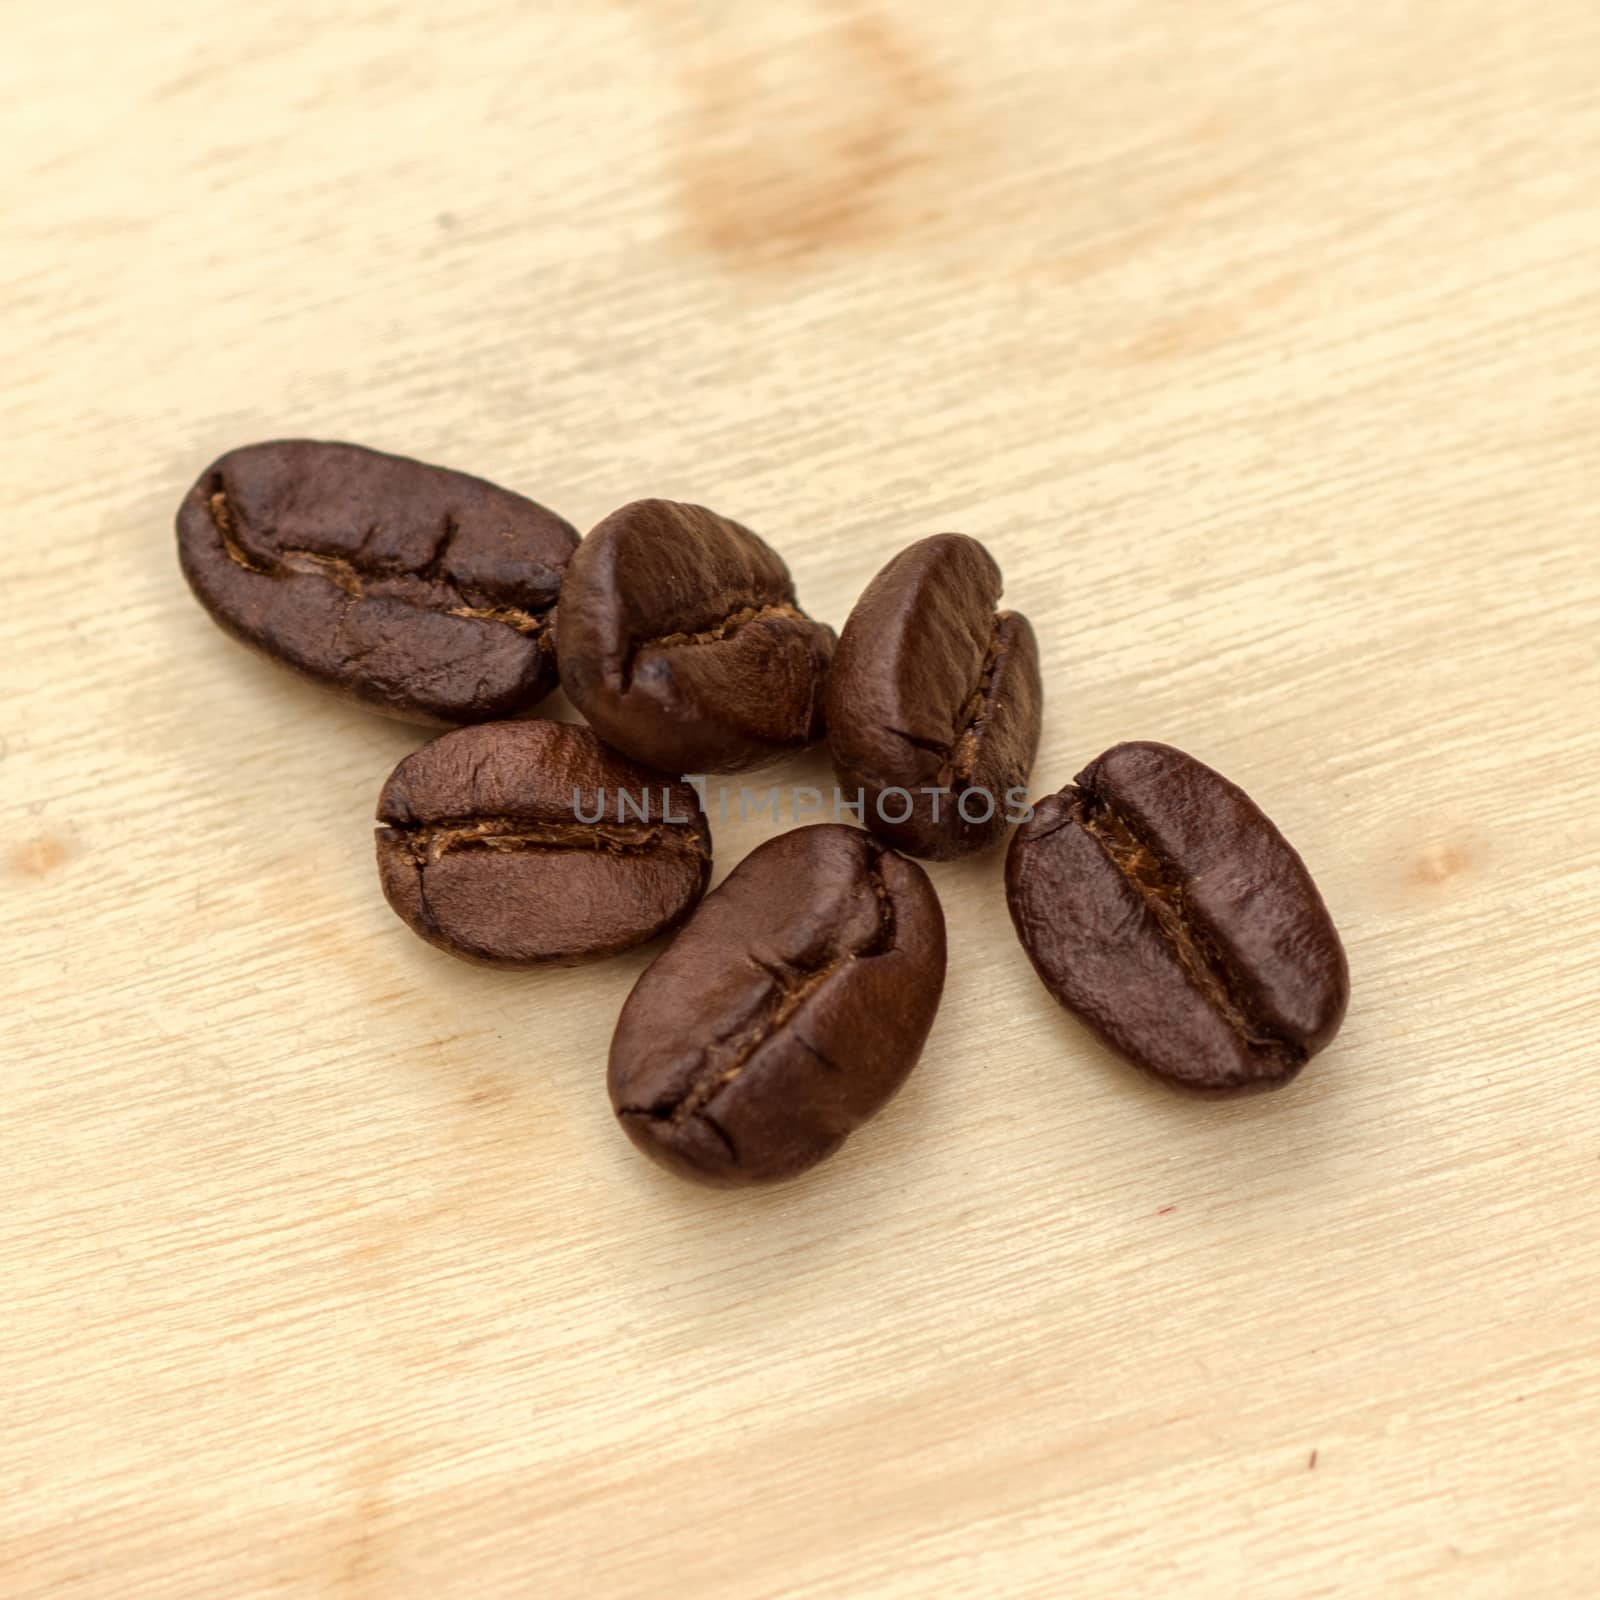 Coffee beans on the wooden